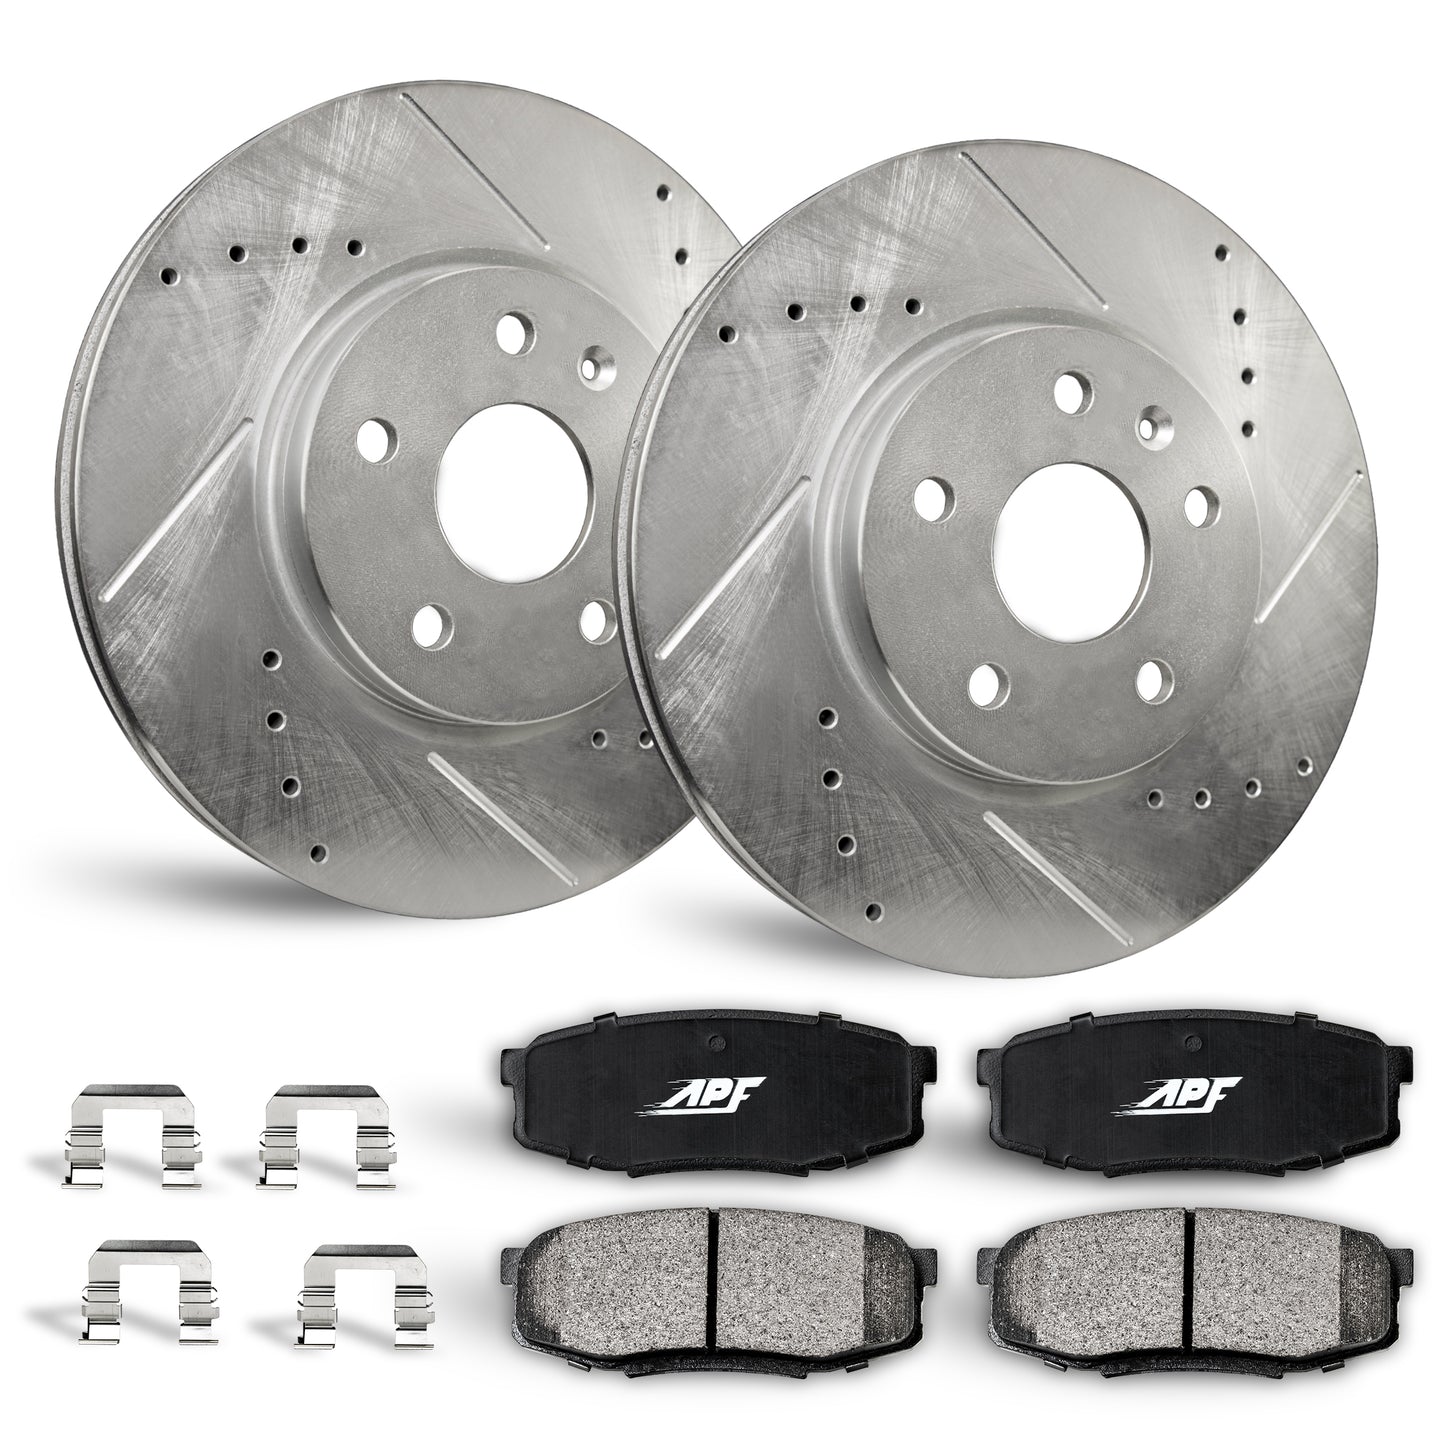 APF Rear Brake Kit compatible with Lincoln MKX 2007-2010 | Zinc Drilled Slotted Rotors with Ceramic Carbon Fiber Brake Pads